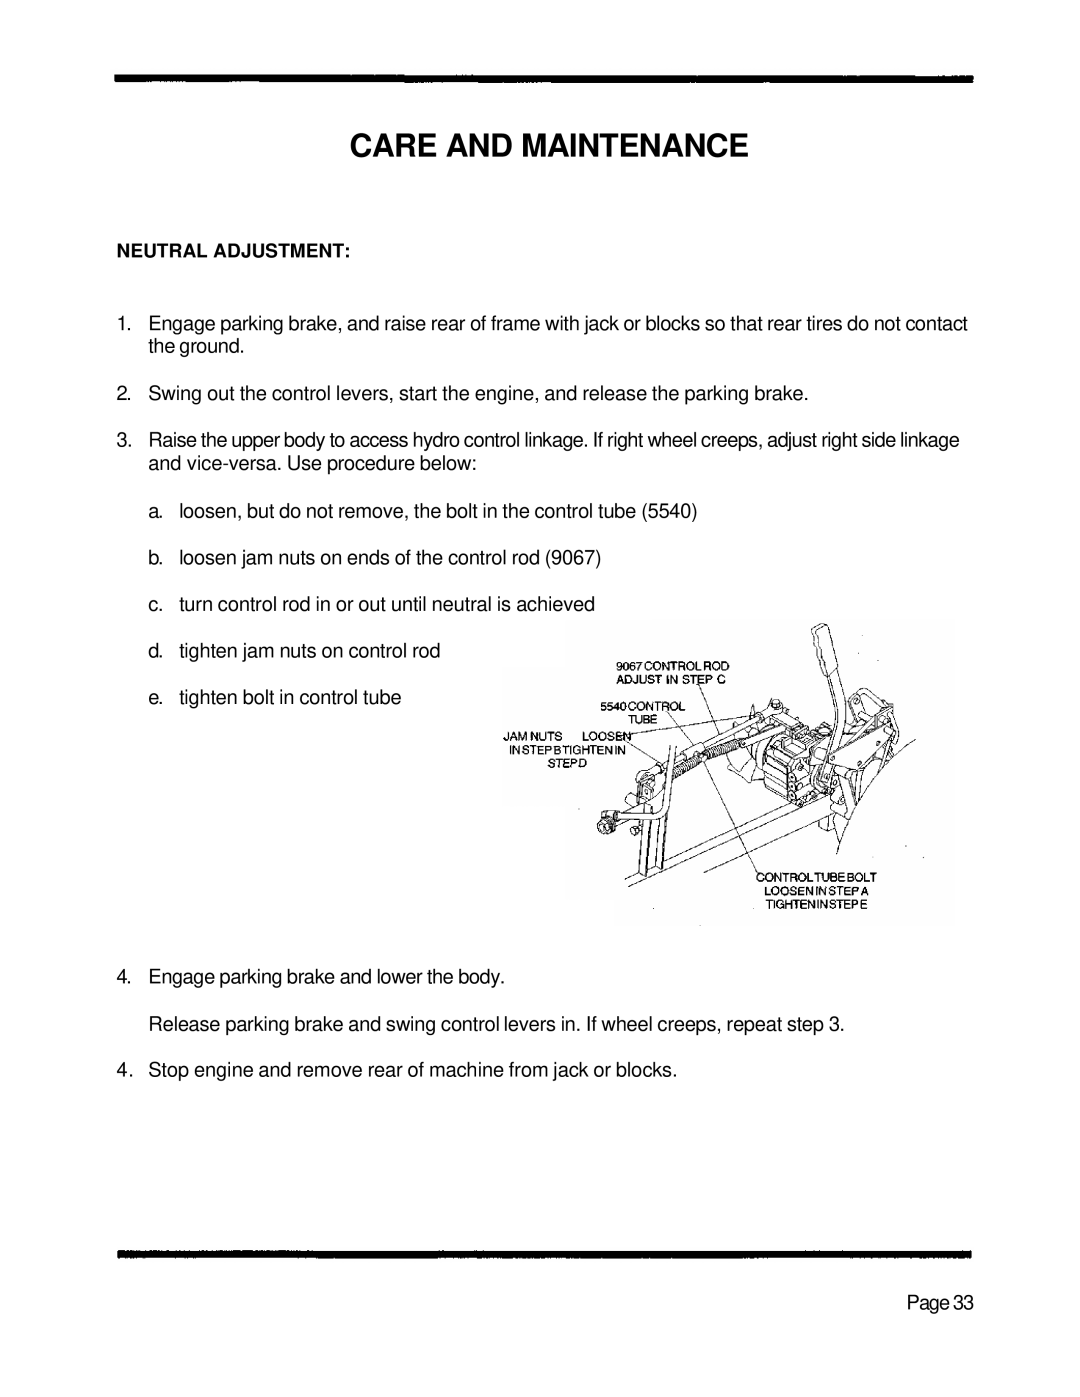 Dixon 5000 Series manual Care And Maintenance, a. loosen, but do not remove, the bolt in the control tube 